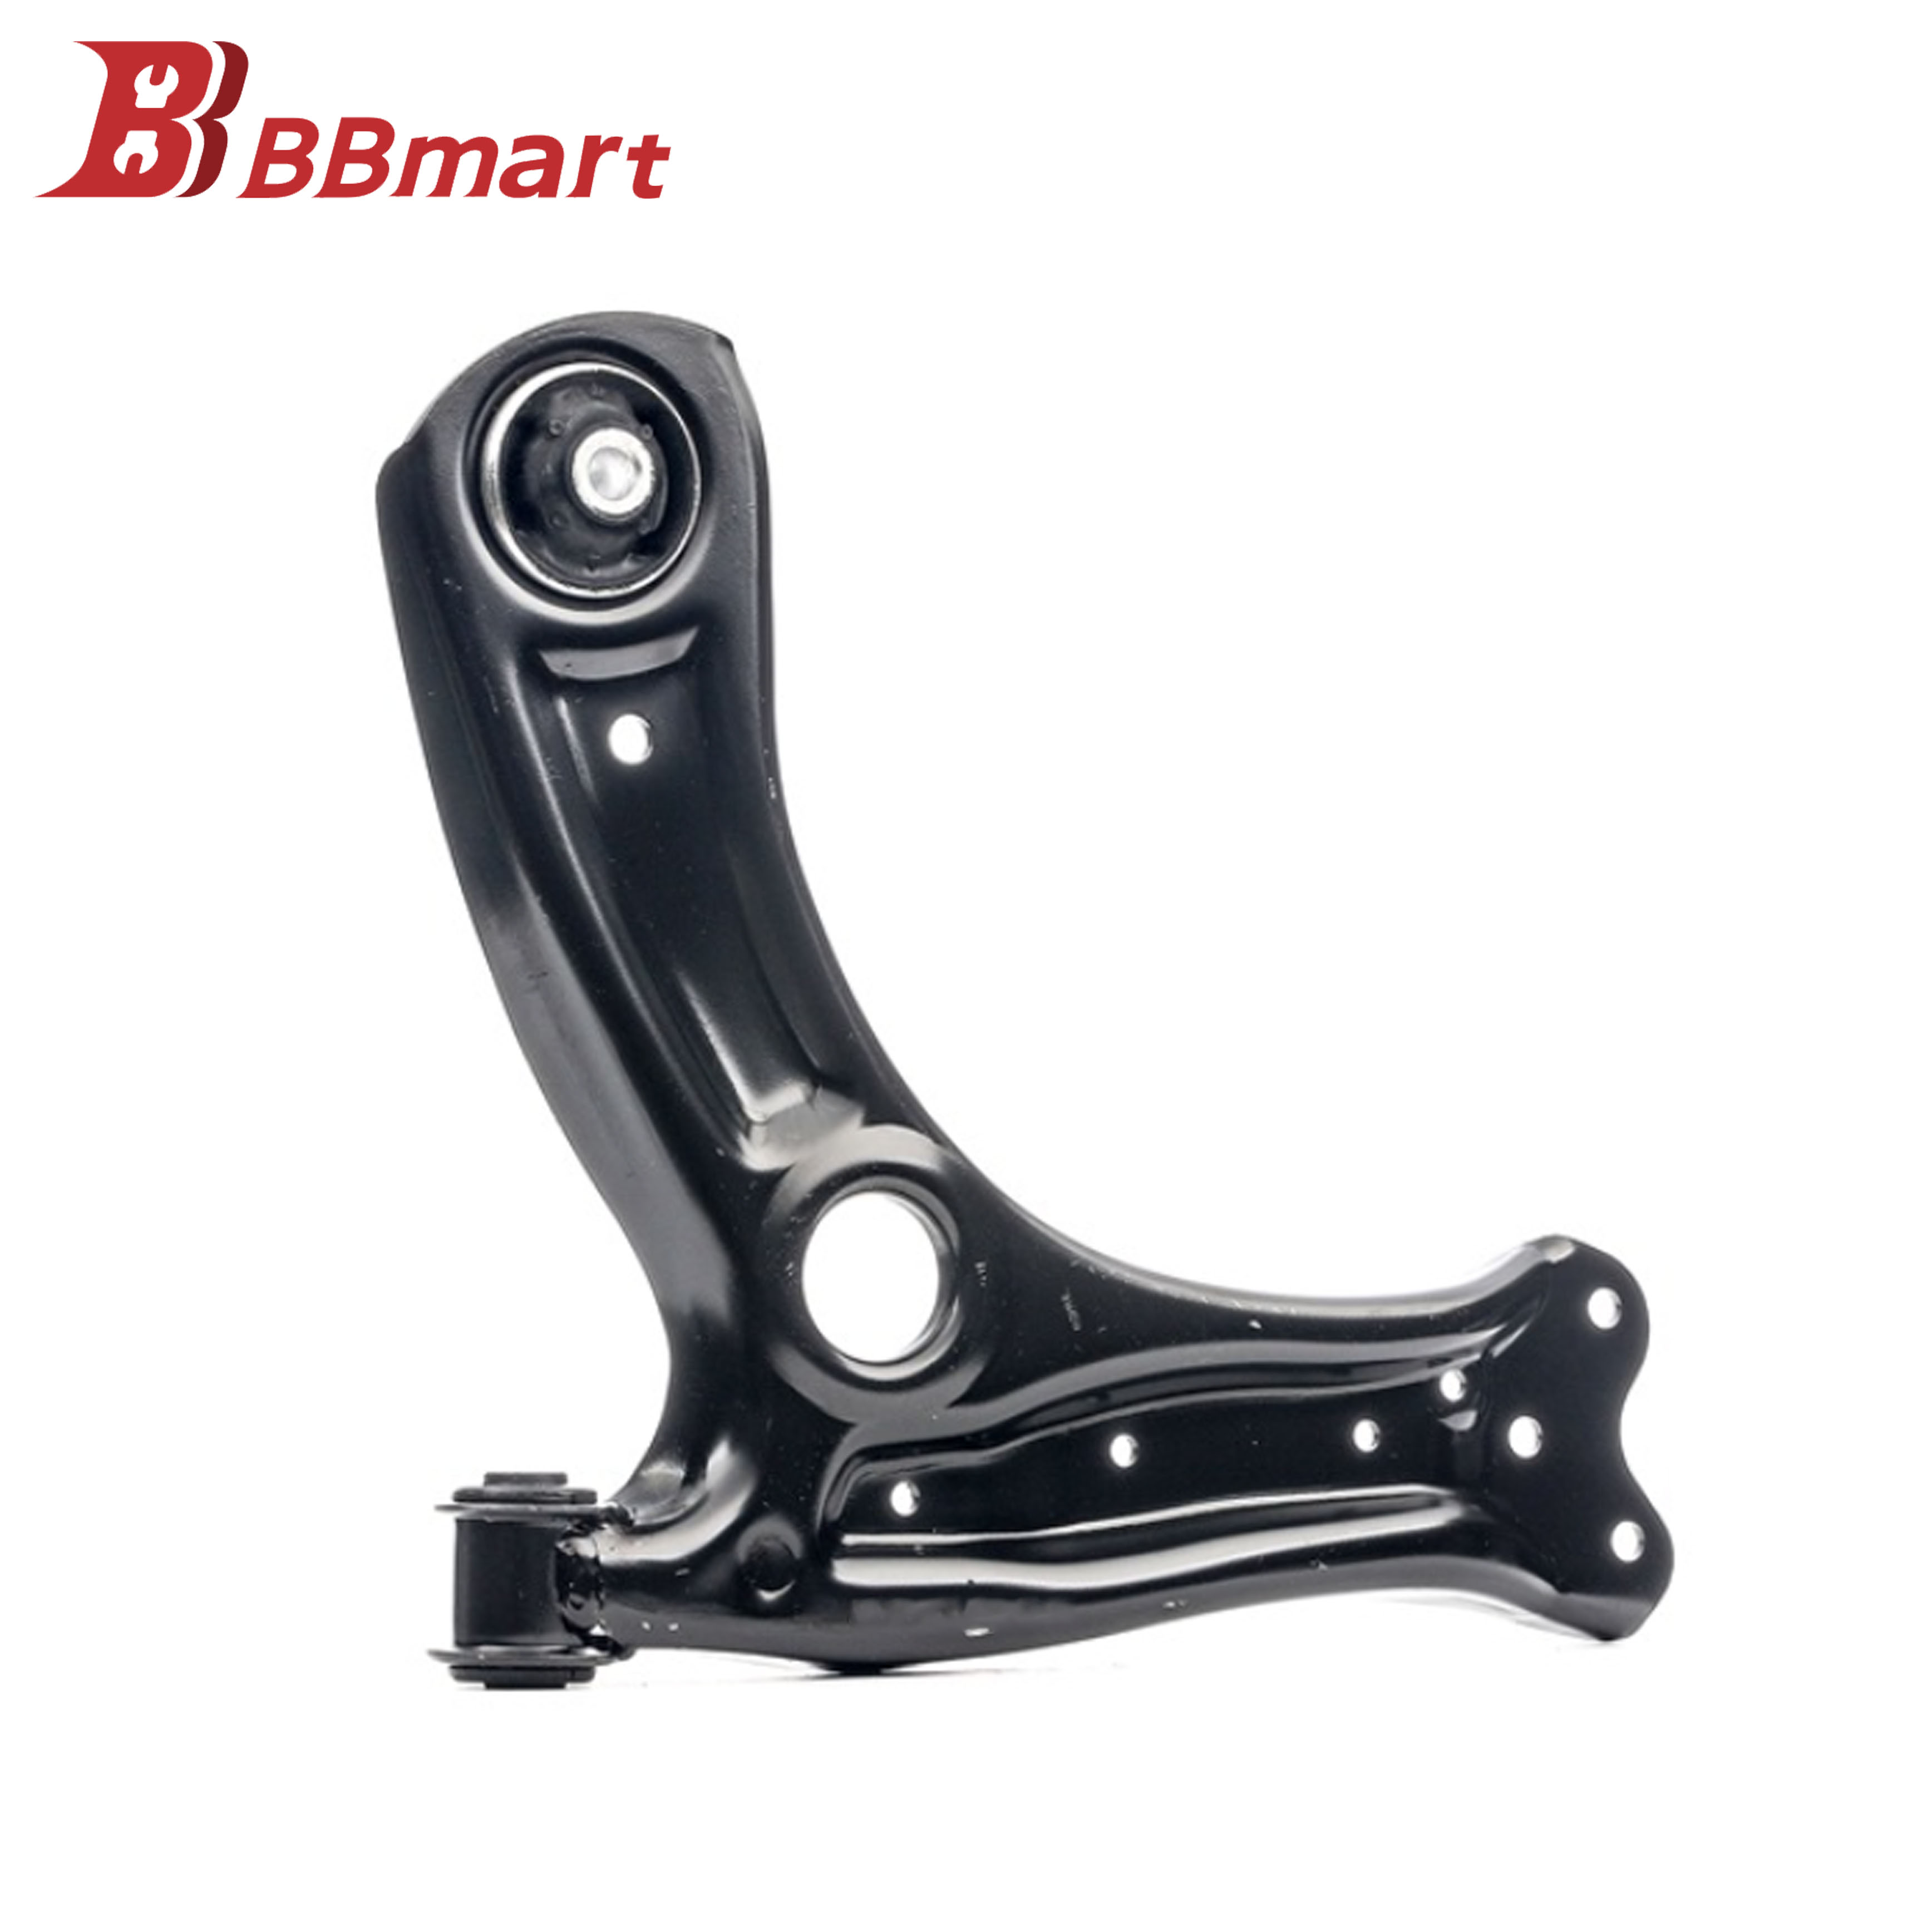 BBmart OEM Auto Parts Lower Control Arm 6R0407151 For VW Seat Polo CORDOBA (6L2) 2002-2009